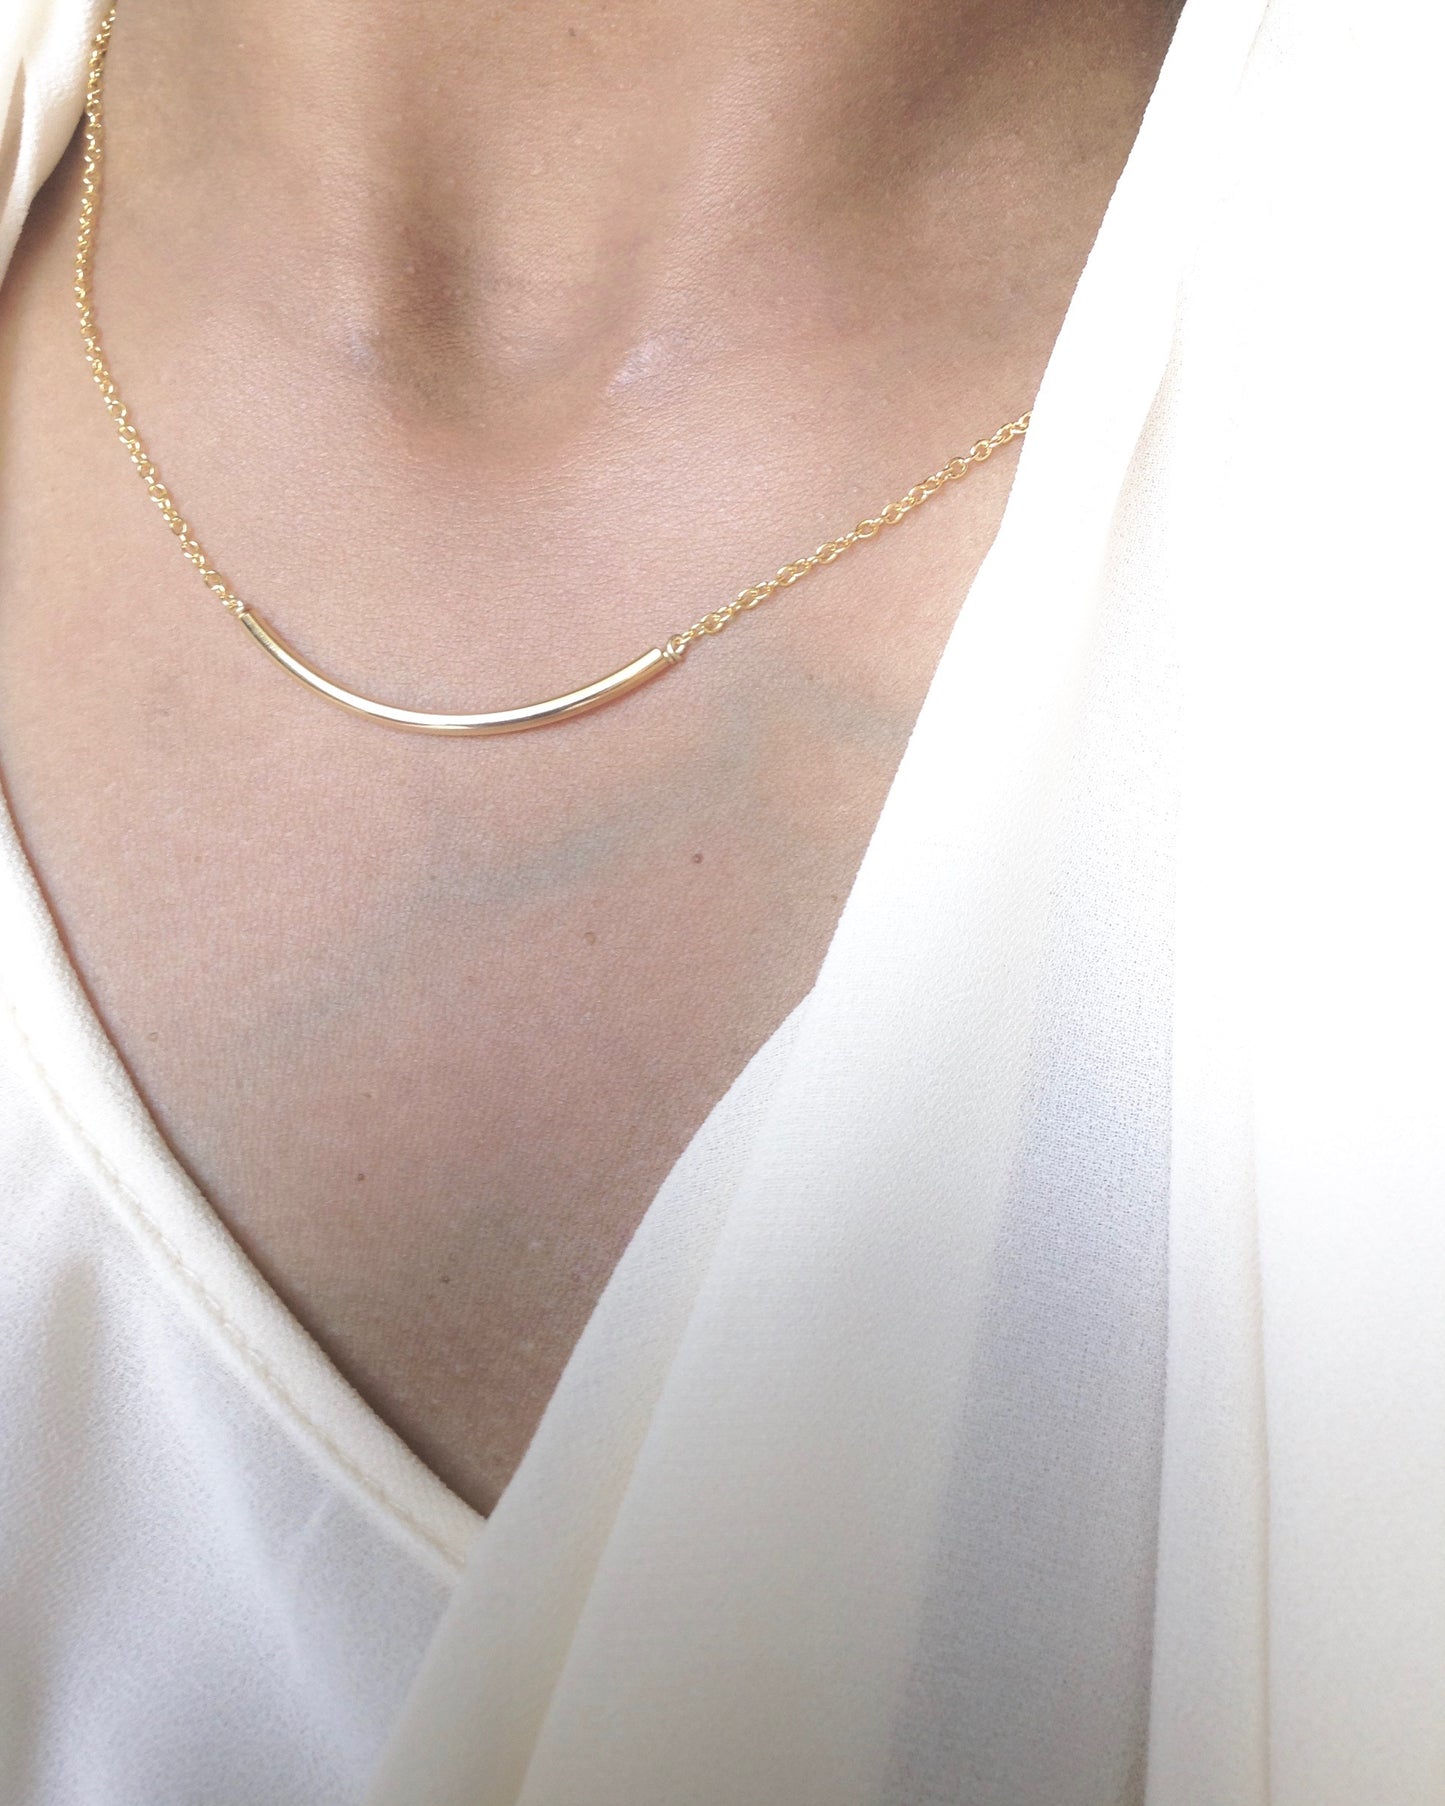 Curved Bar Necklace | Small Dainty Necklace in Gold Filled or Sterling Silver | IB Jewelry